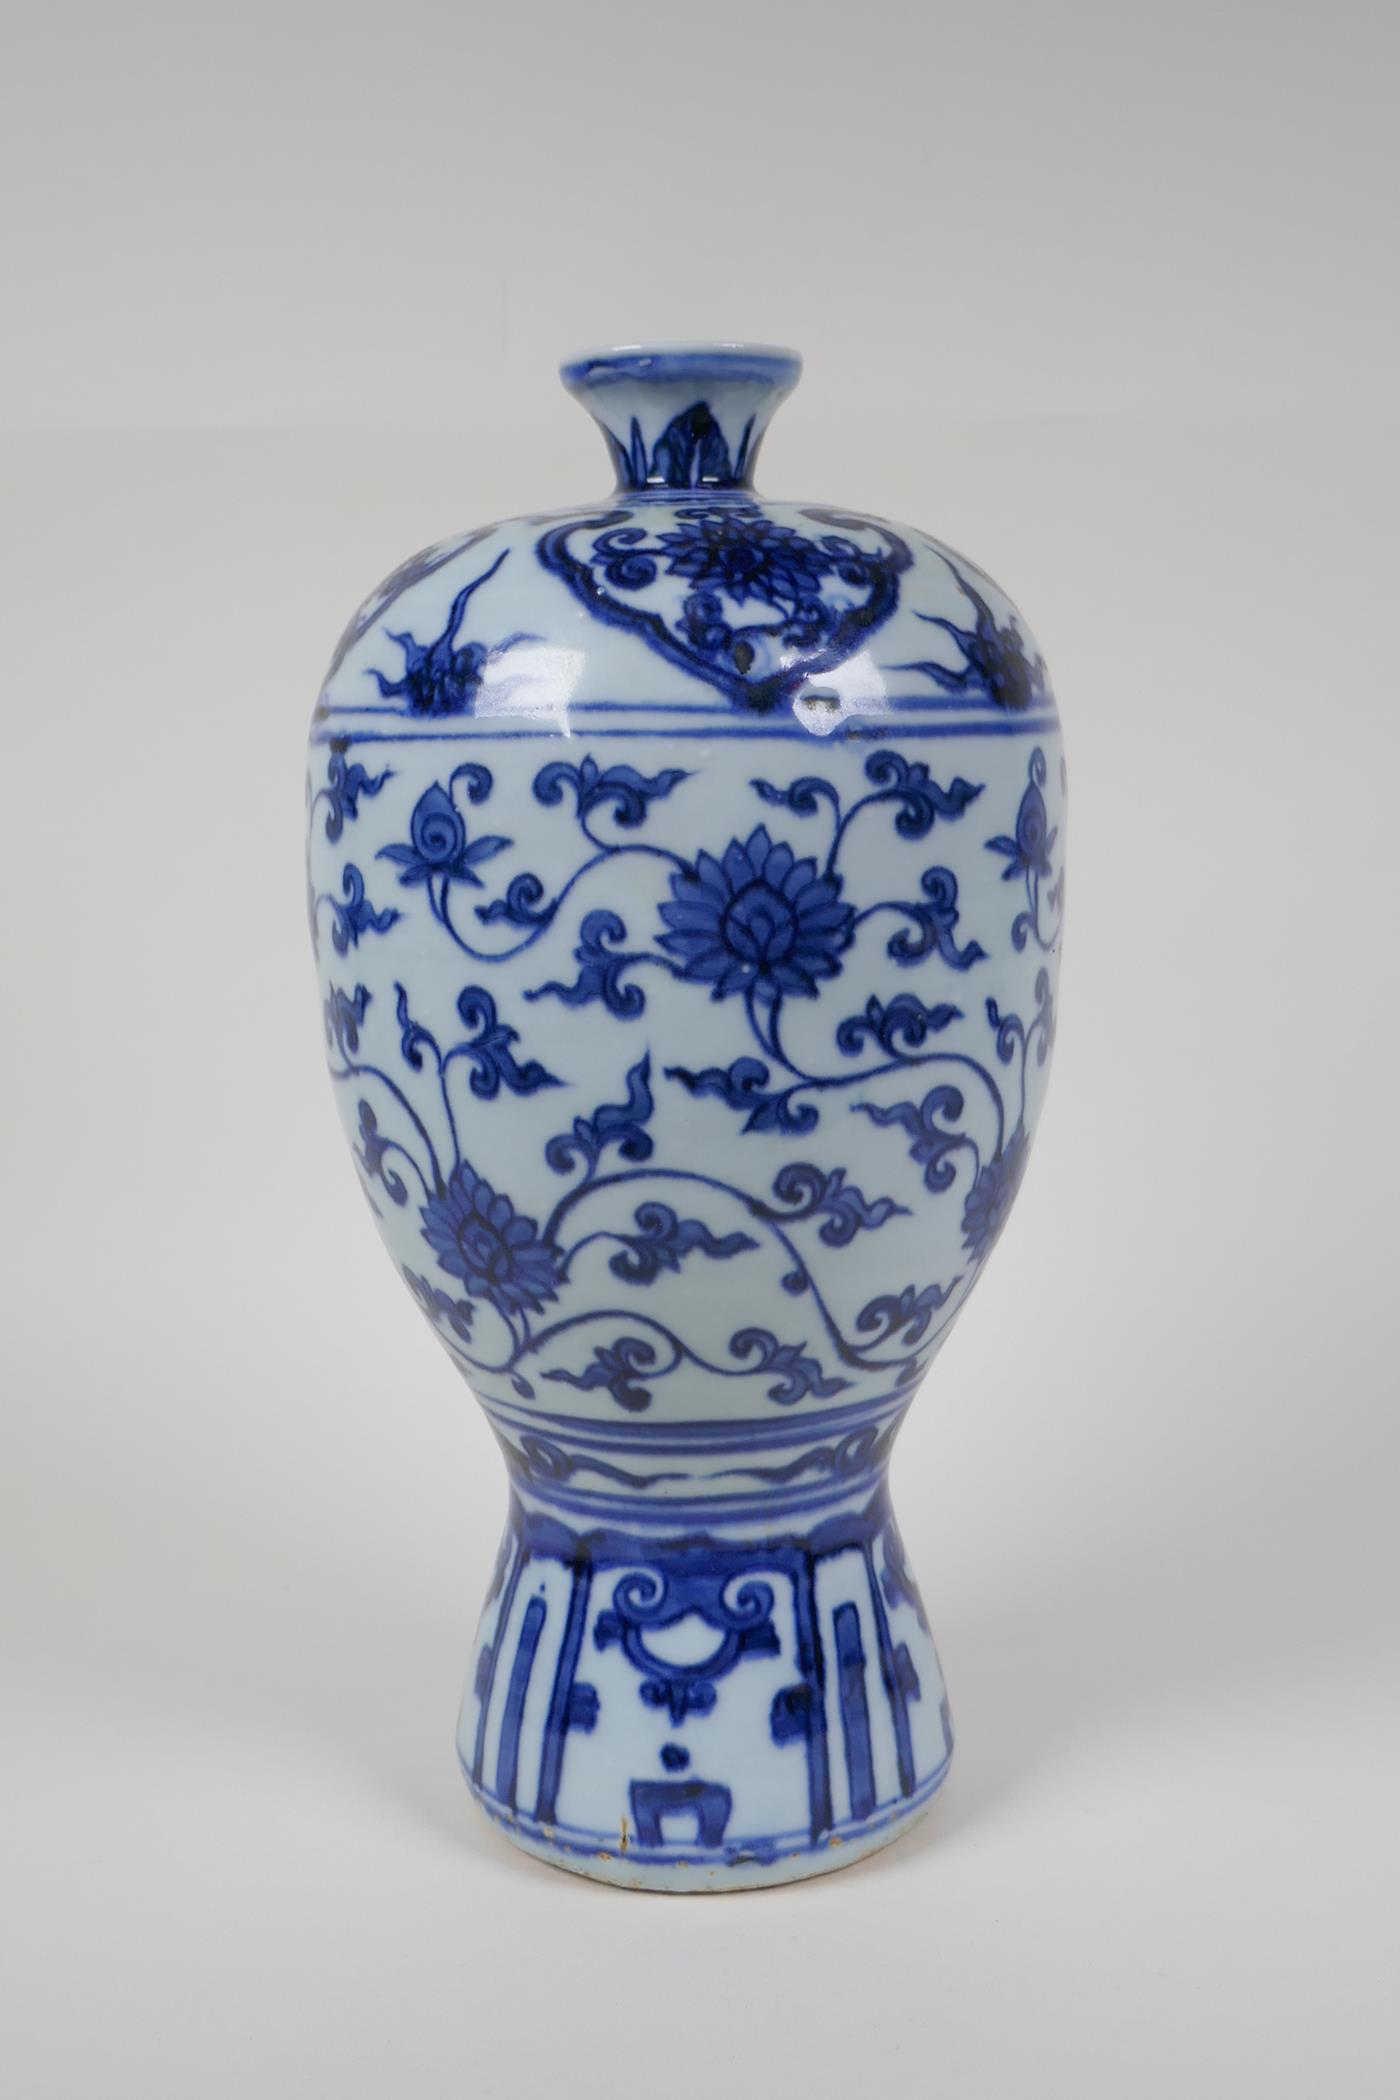 A Chinese ming style blue and white porcelain vase with scrolling lotus flower pattern, 11½" high - Image 2 of 8